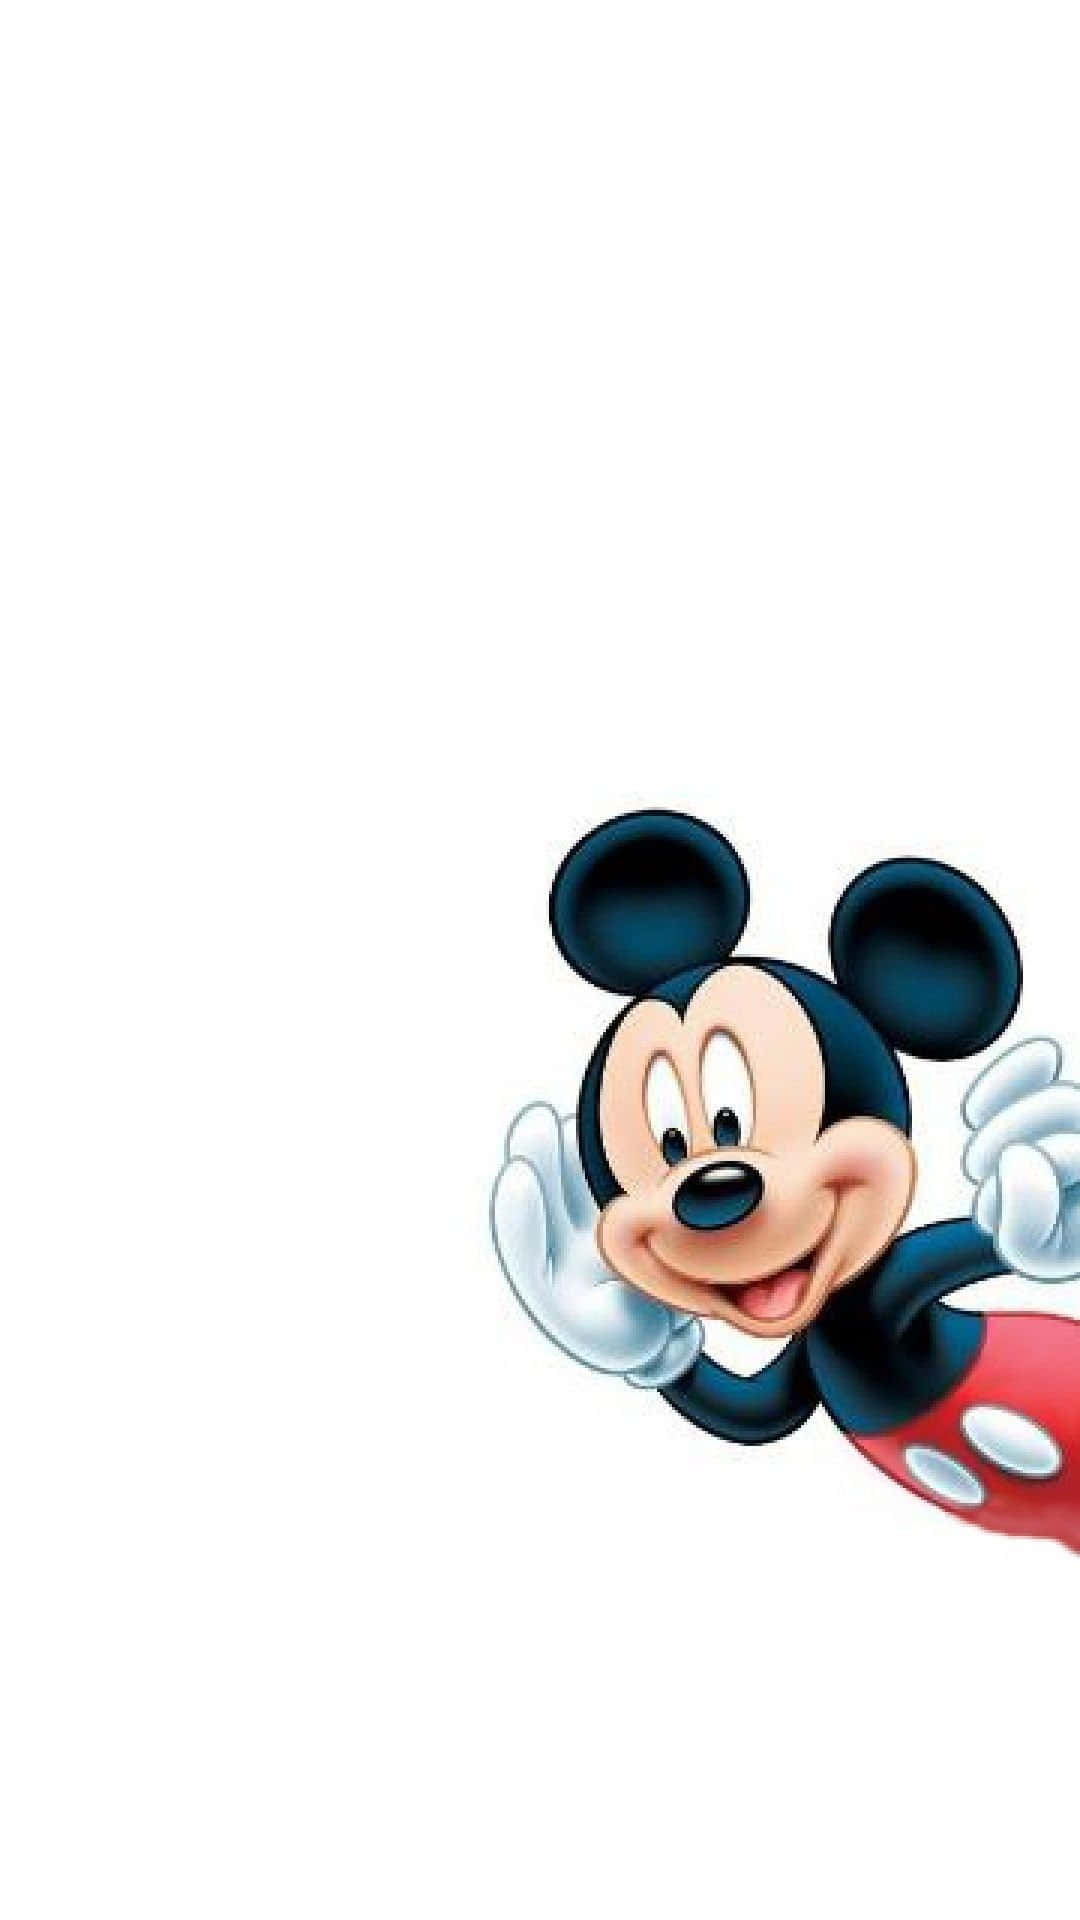 Look How Cute Mickey Mouse Is!